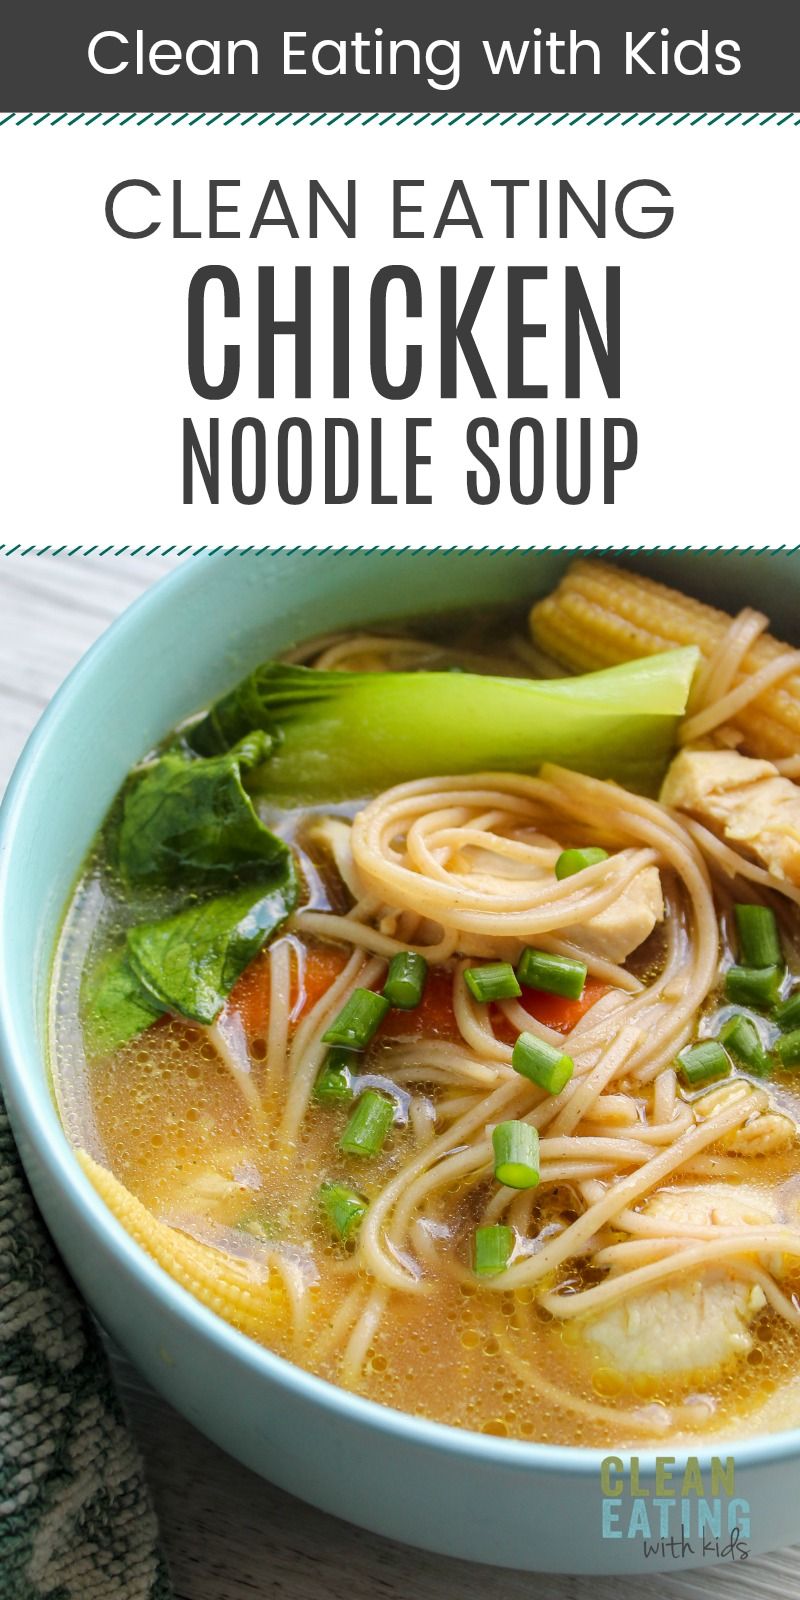 Clean Eating Chicken Noodle Soup Recipe